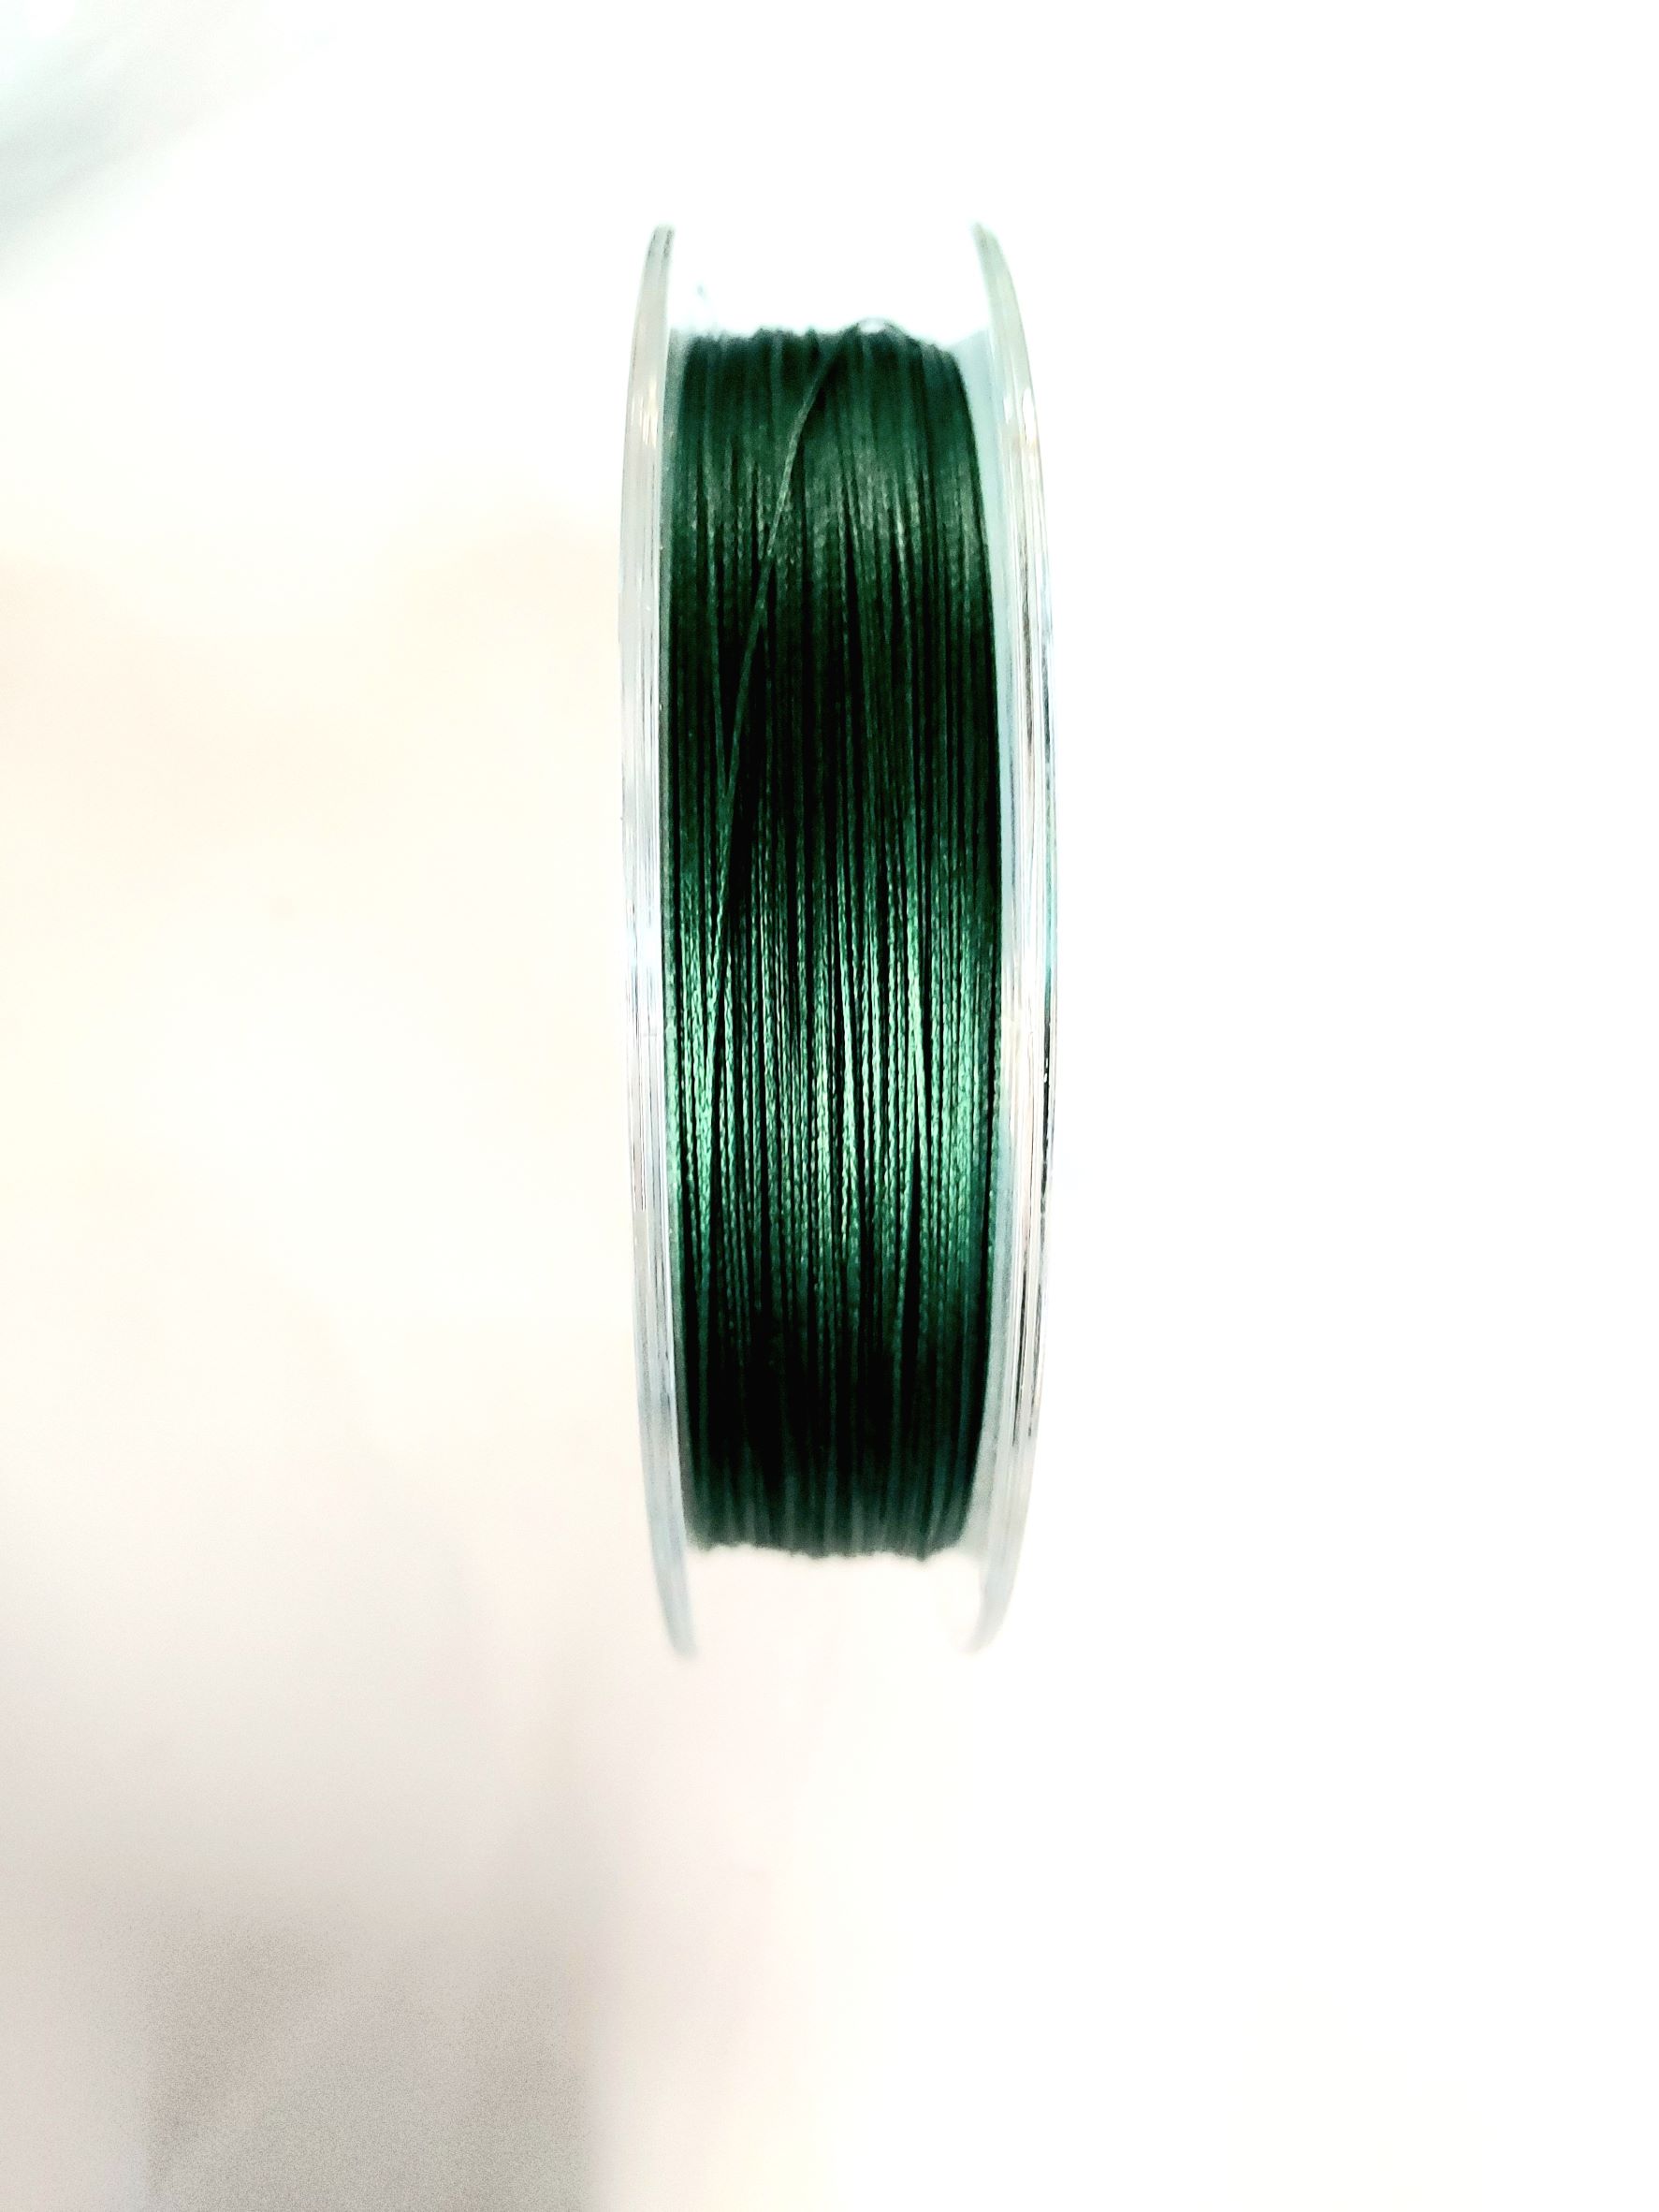 X8 Braided Fishing Line, Upgraded Spin Fishing Wire，Smooth and Ultra Thin  海外 即決 - スキル、知識